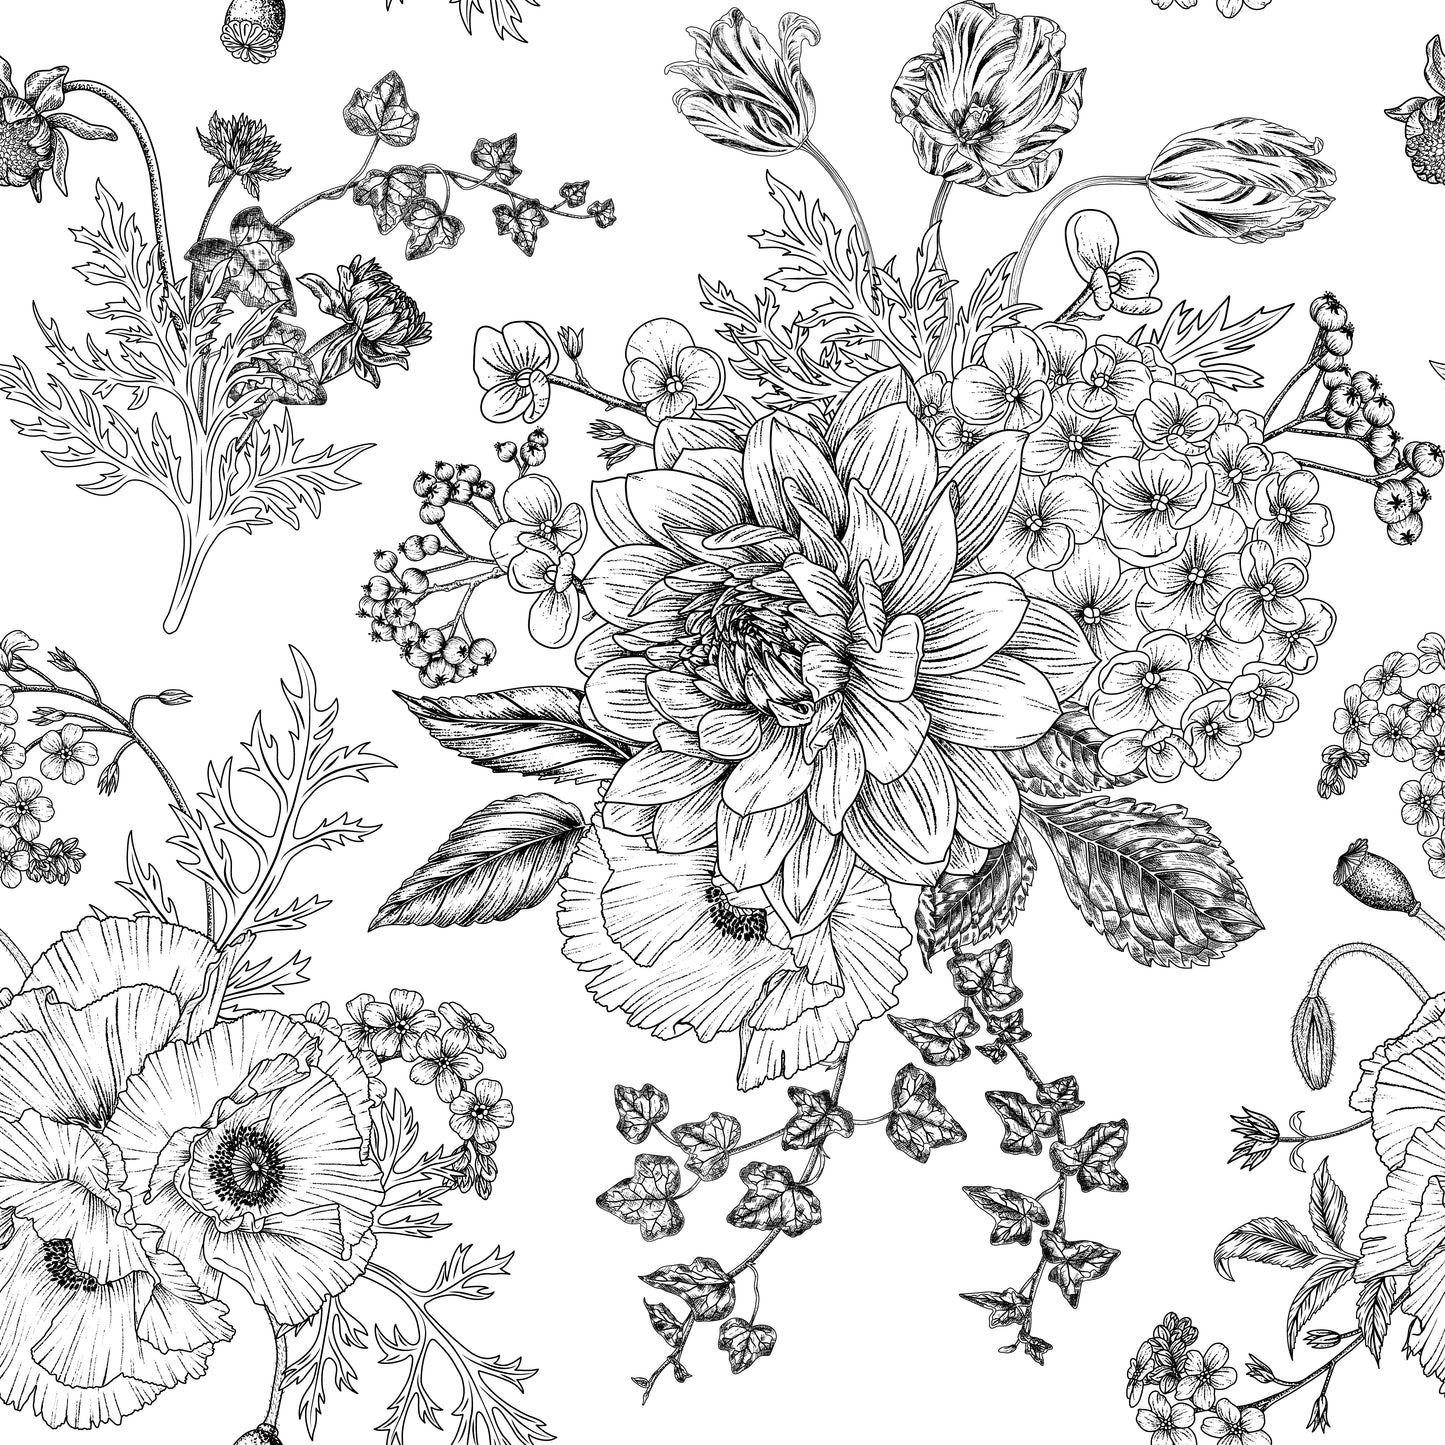 Vintage boho bouquet black floral bouquet print on white background easy to install and remove peel and stick custom wallpaper available in different lengths/sizes locally created and printed in Canada wallpaper. Washable, durable, commercial grade, removable and waterproof.